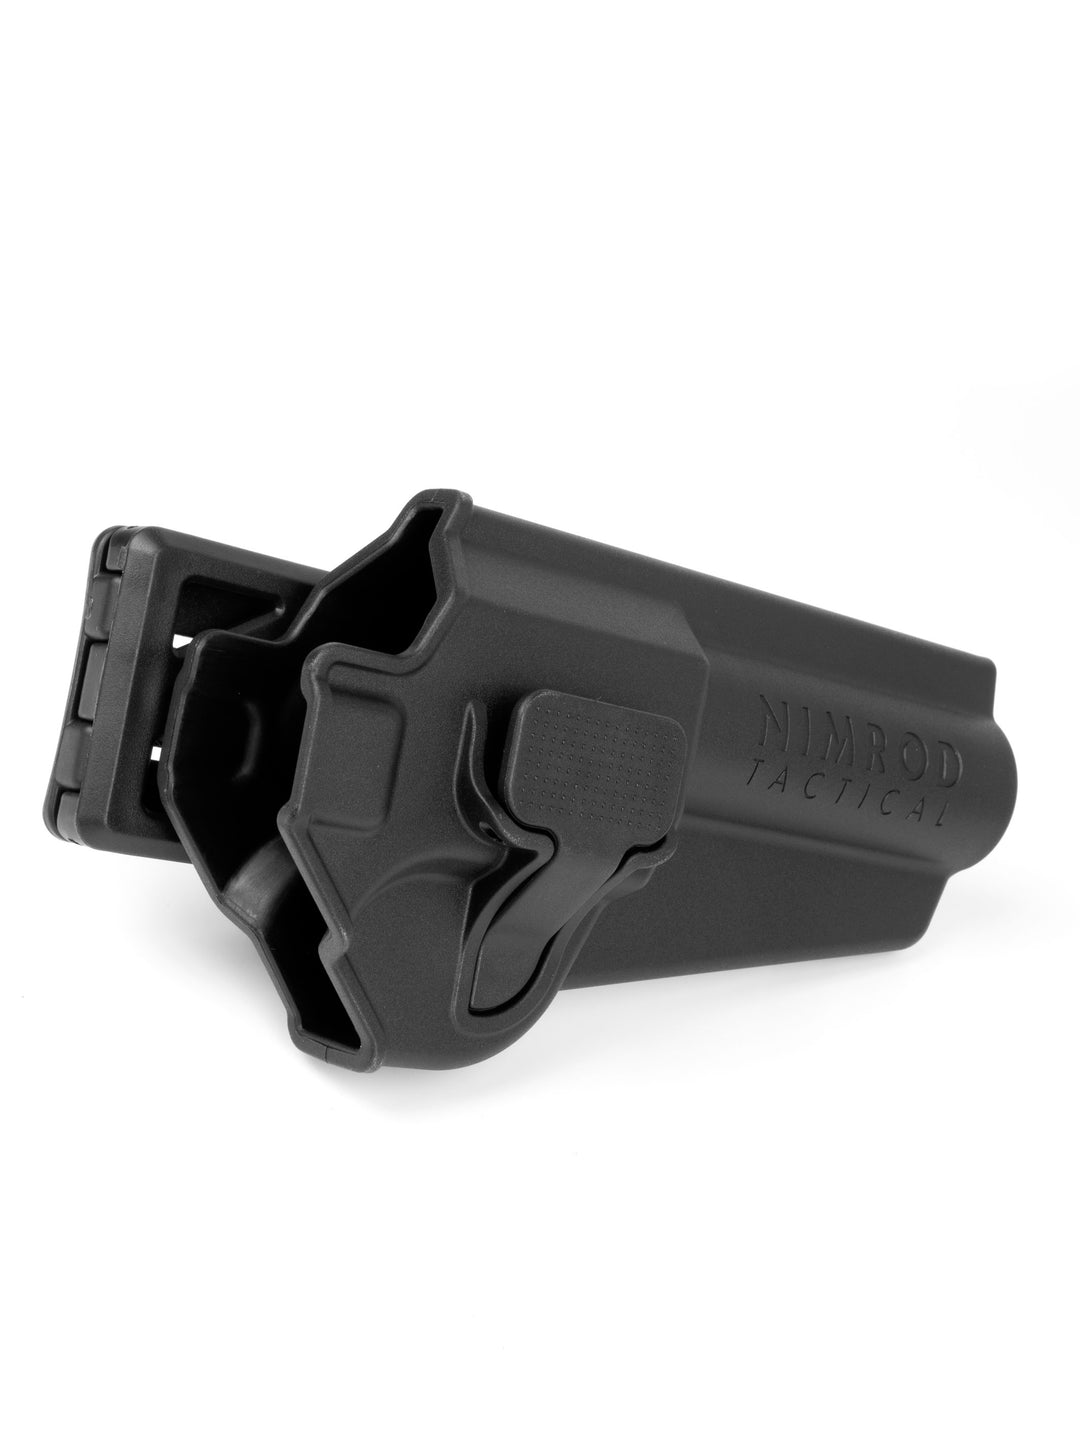 AAP-01 Holster by Nimrod Tactical